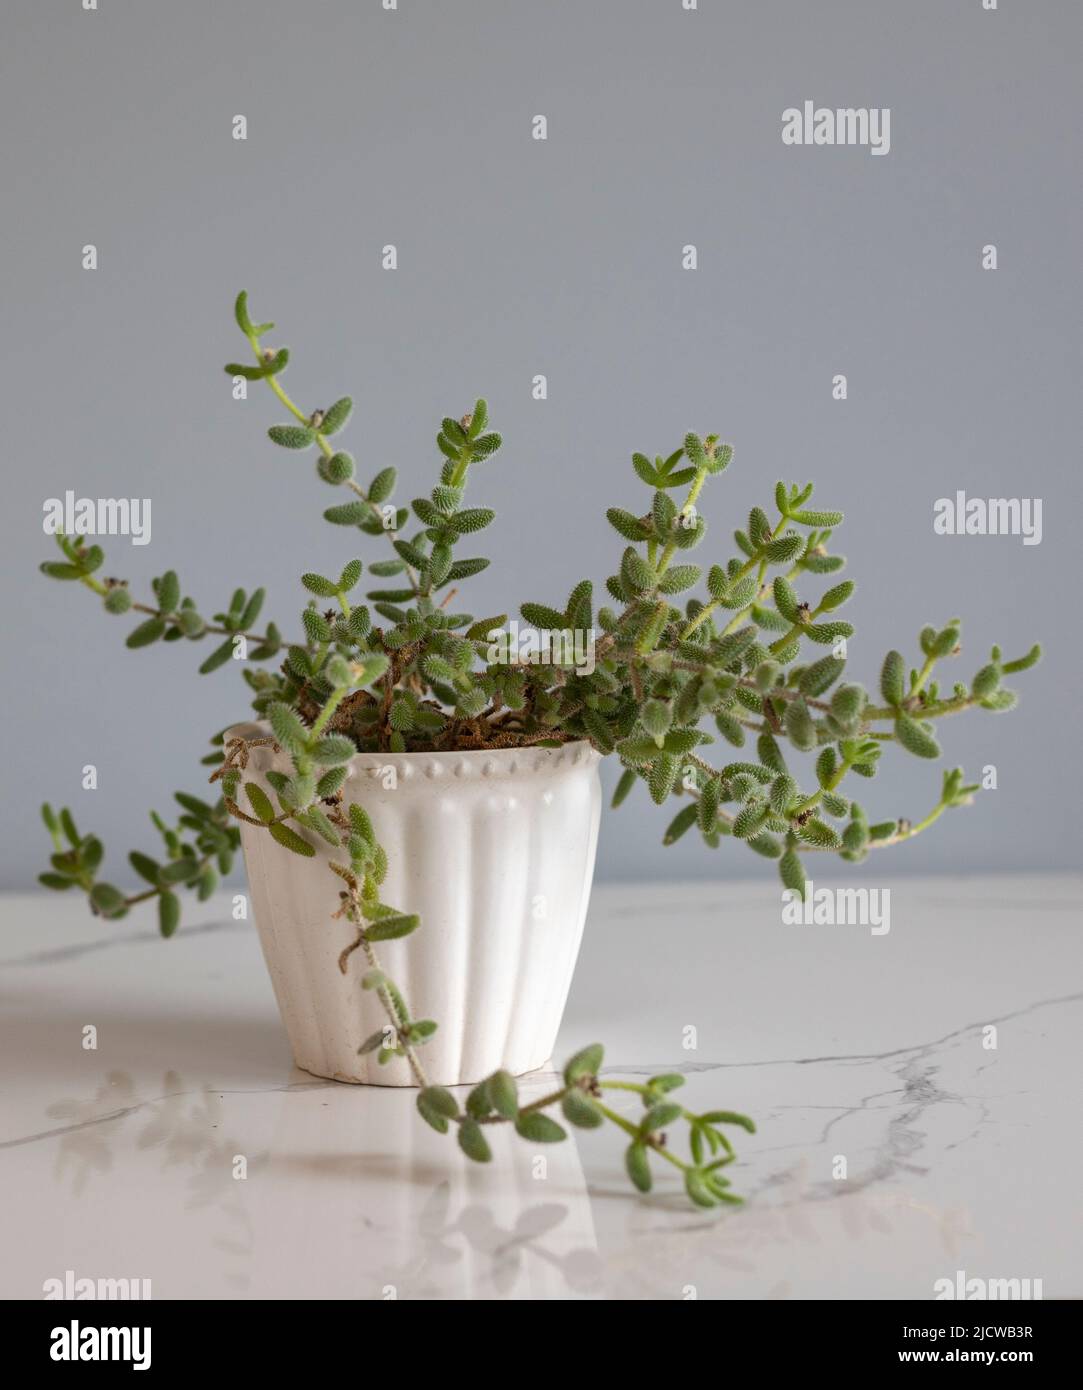 Pickle plant or Delosperma Echinatum on a ceramic floor with grey wall in background Stock Photo